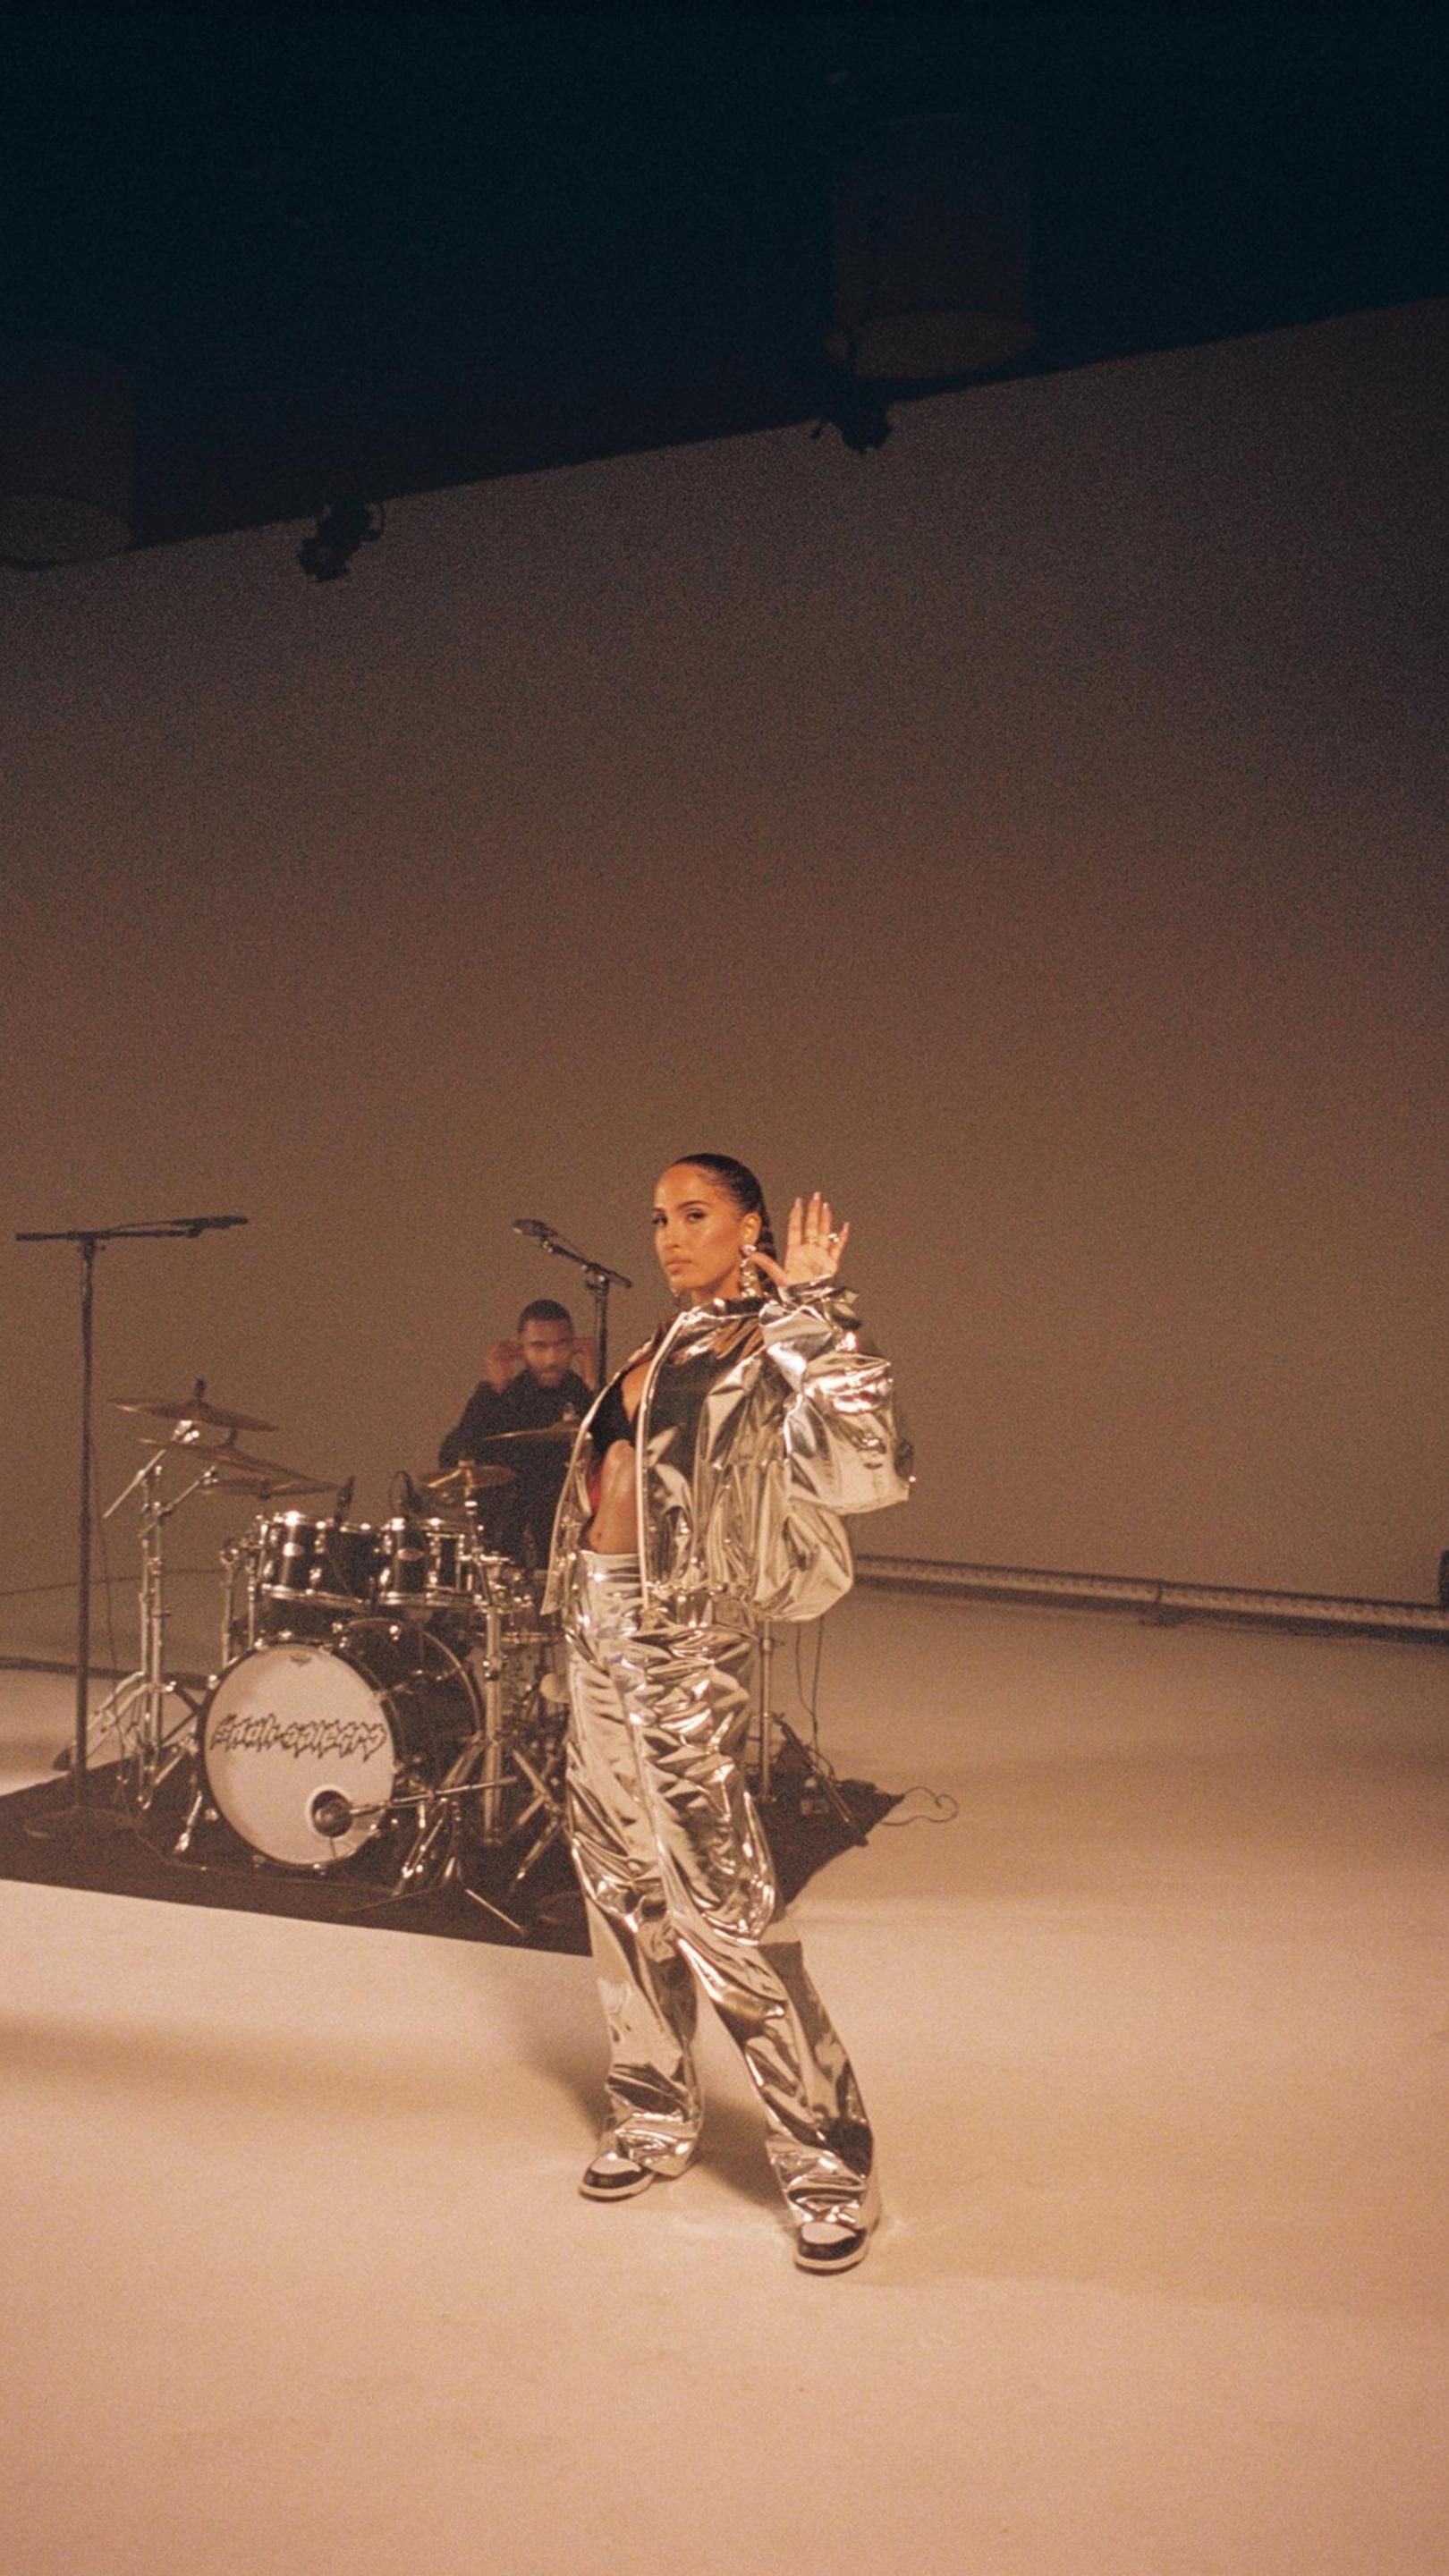 A musician wearing a reflective silver suit looks at the camera and waves and a person plays a drum kit behind them.